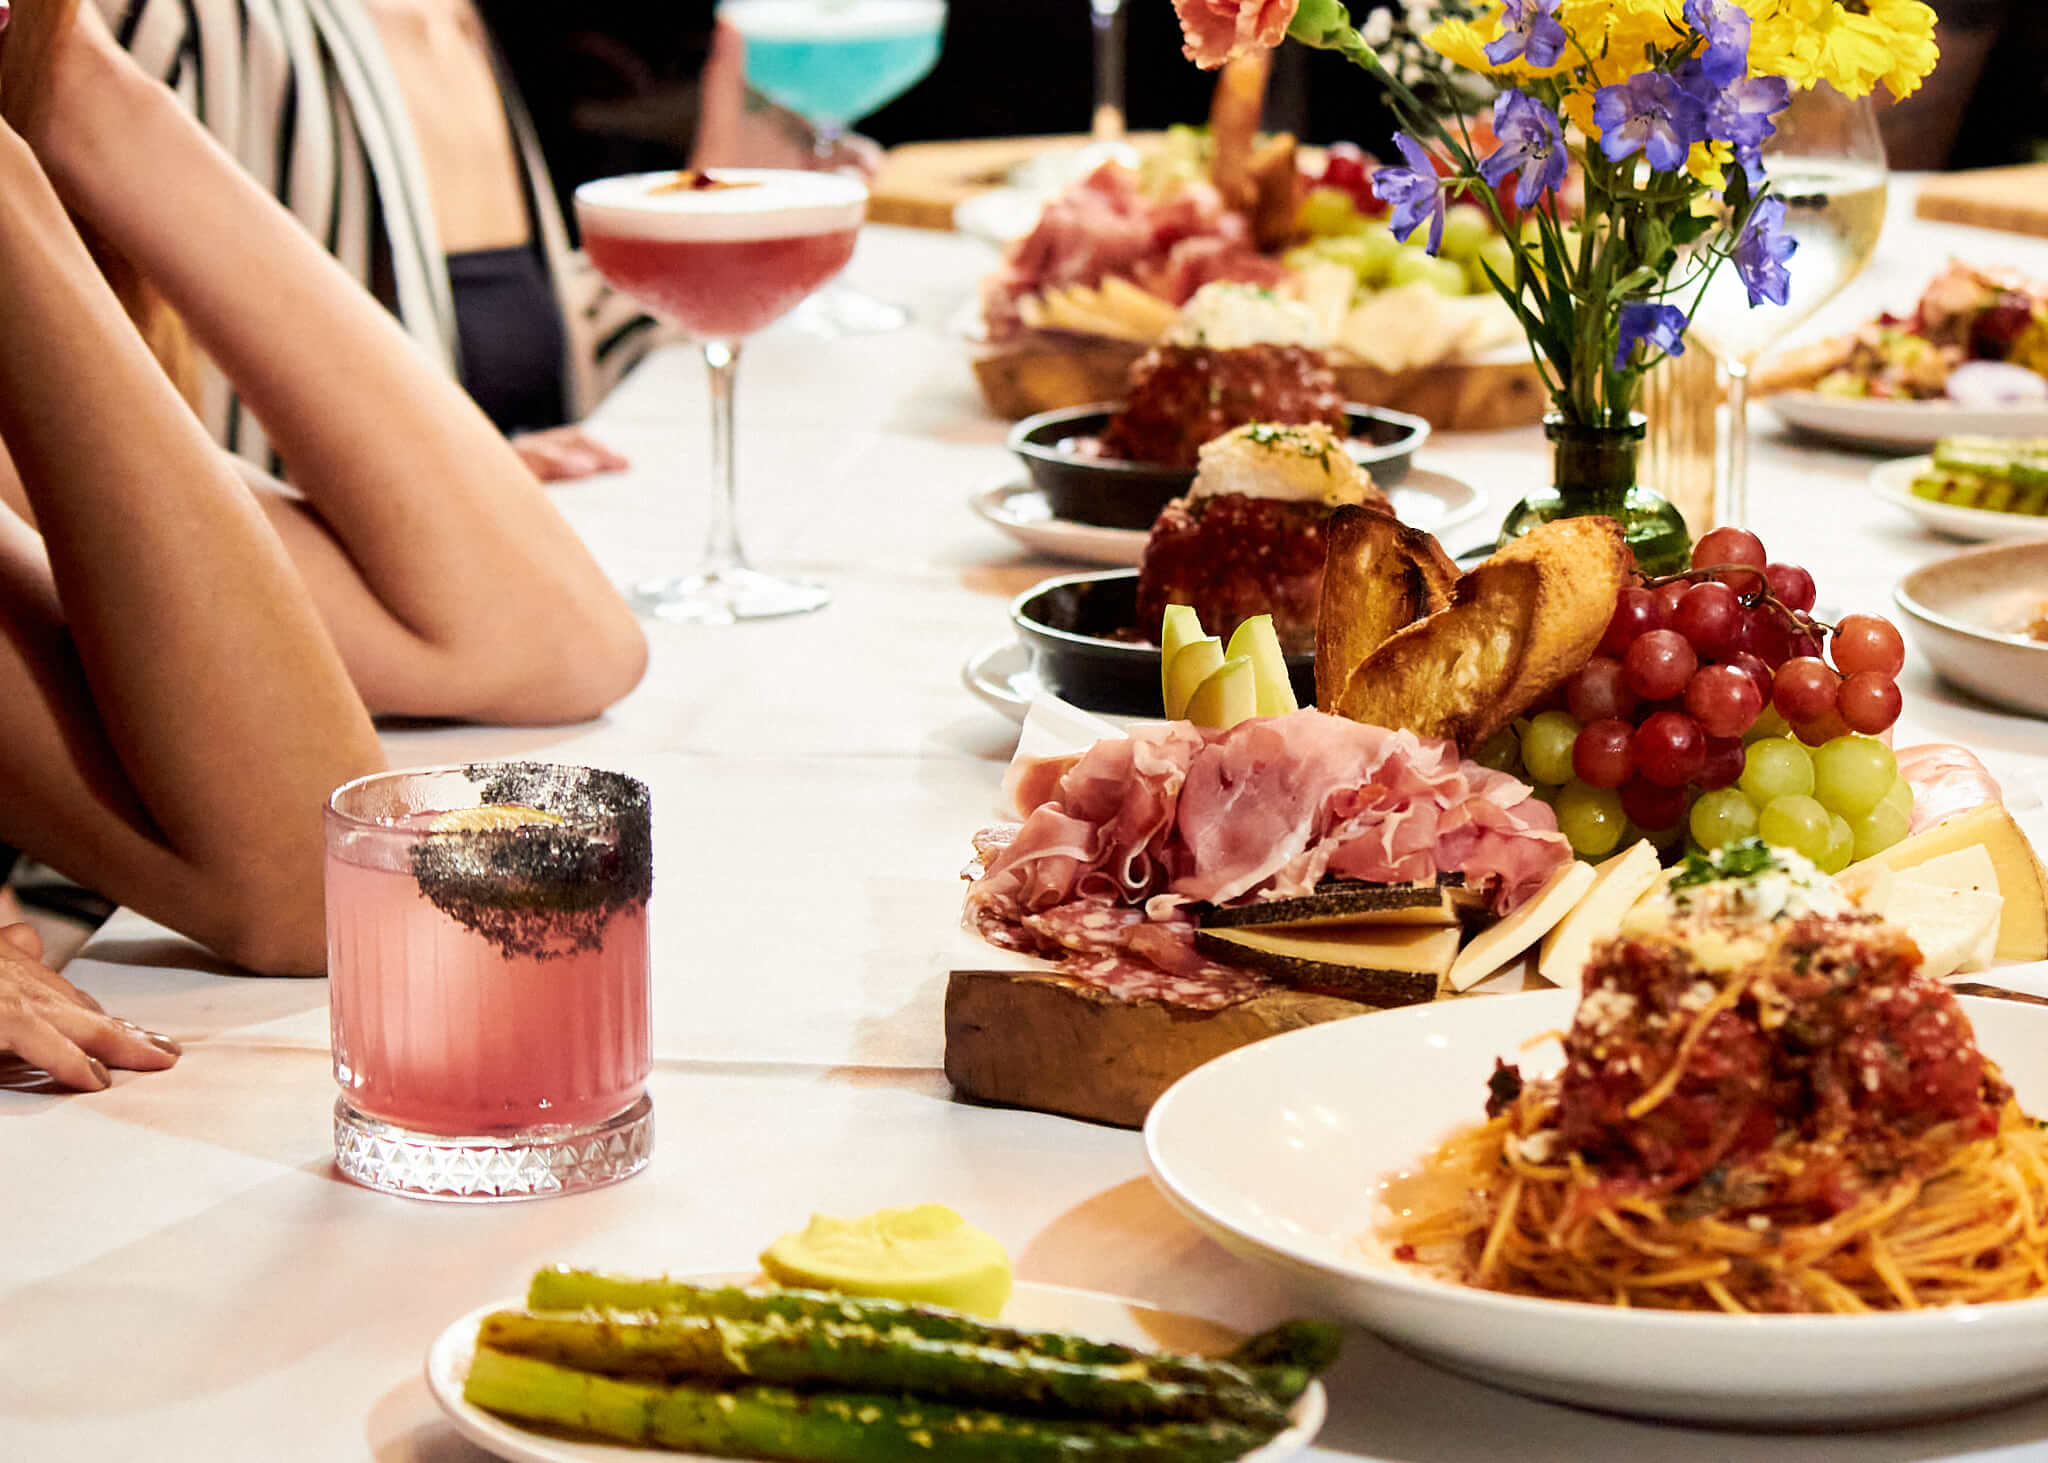 LAVO Las Vegas - Women at bar with cocktails & charcuterie